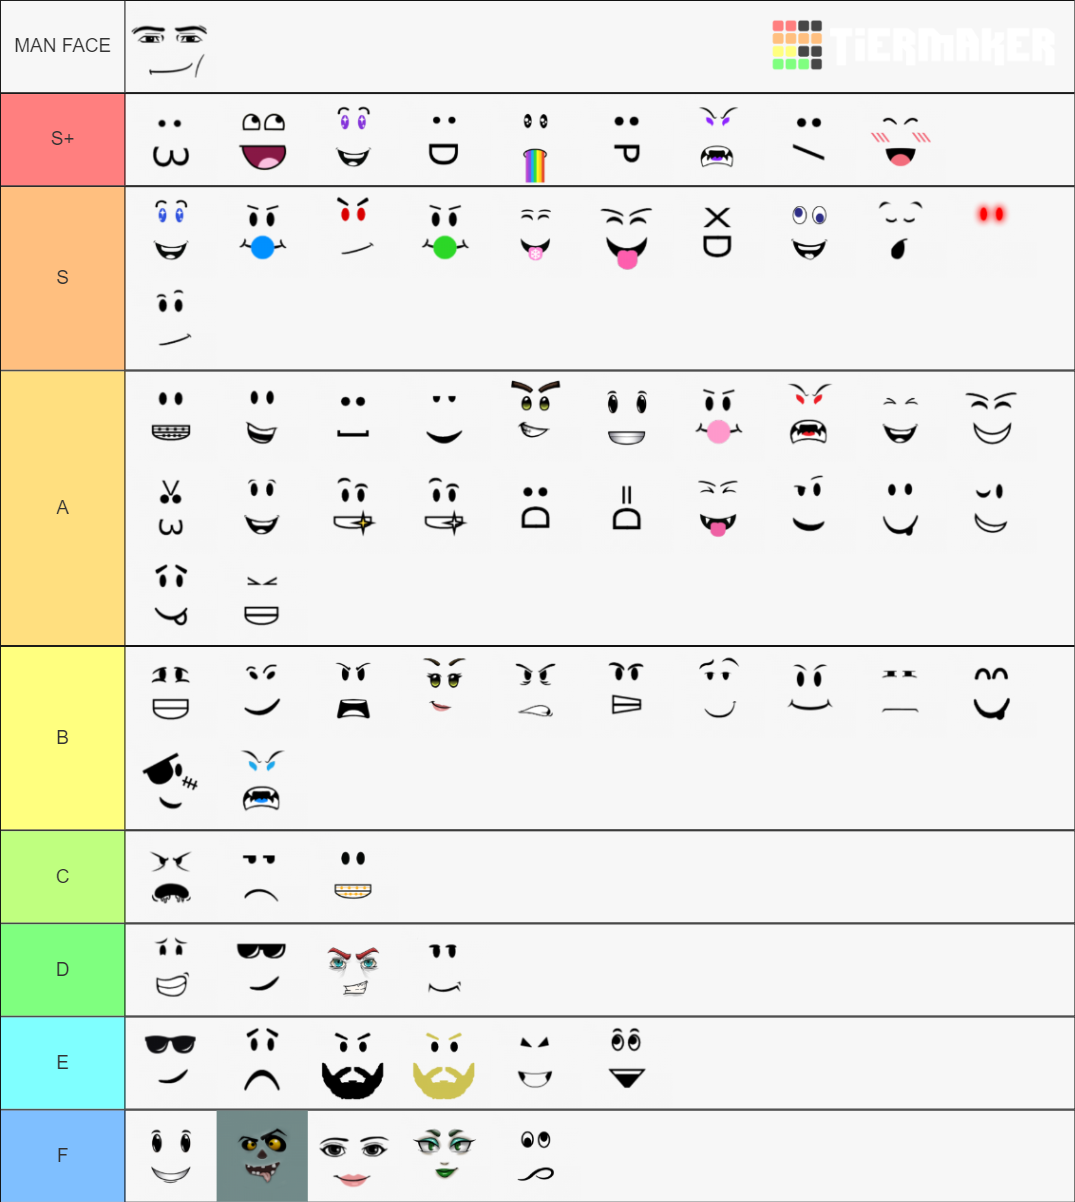 Most Popular Roblox Faces Tier List Rankings) TierMaker